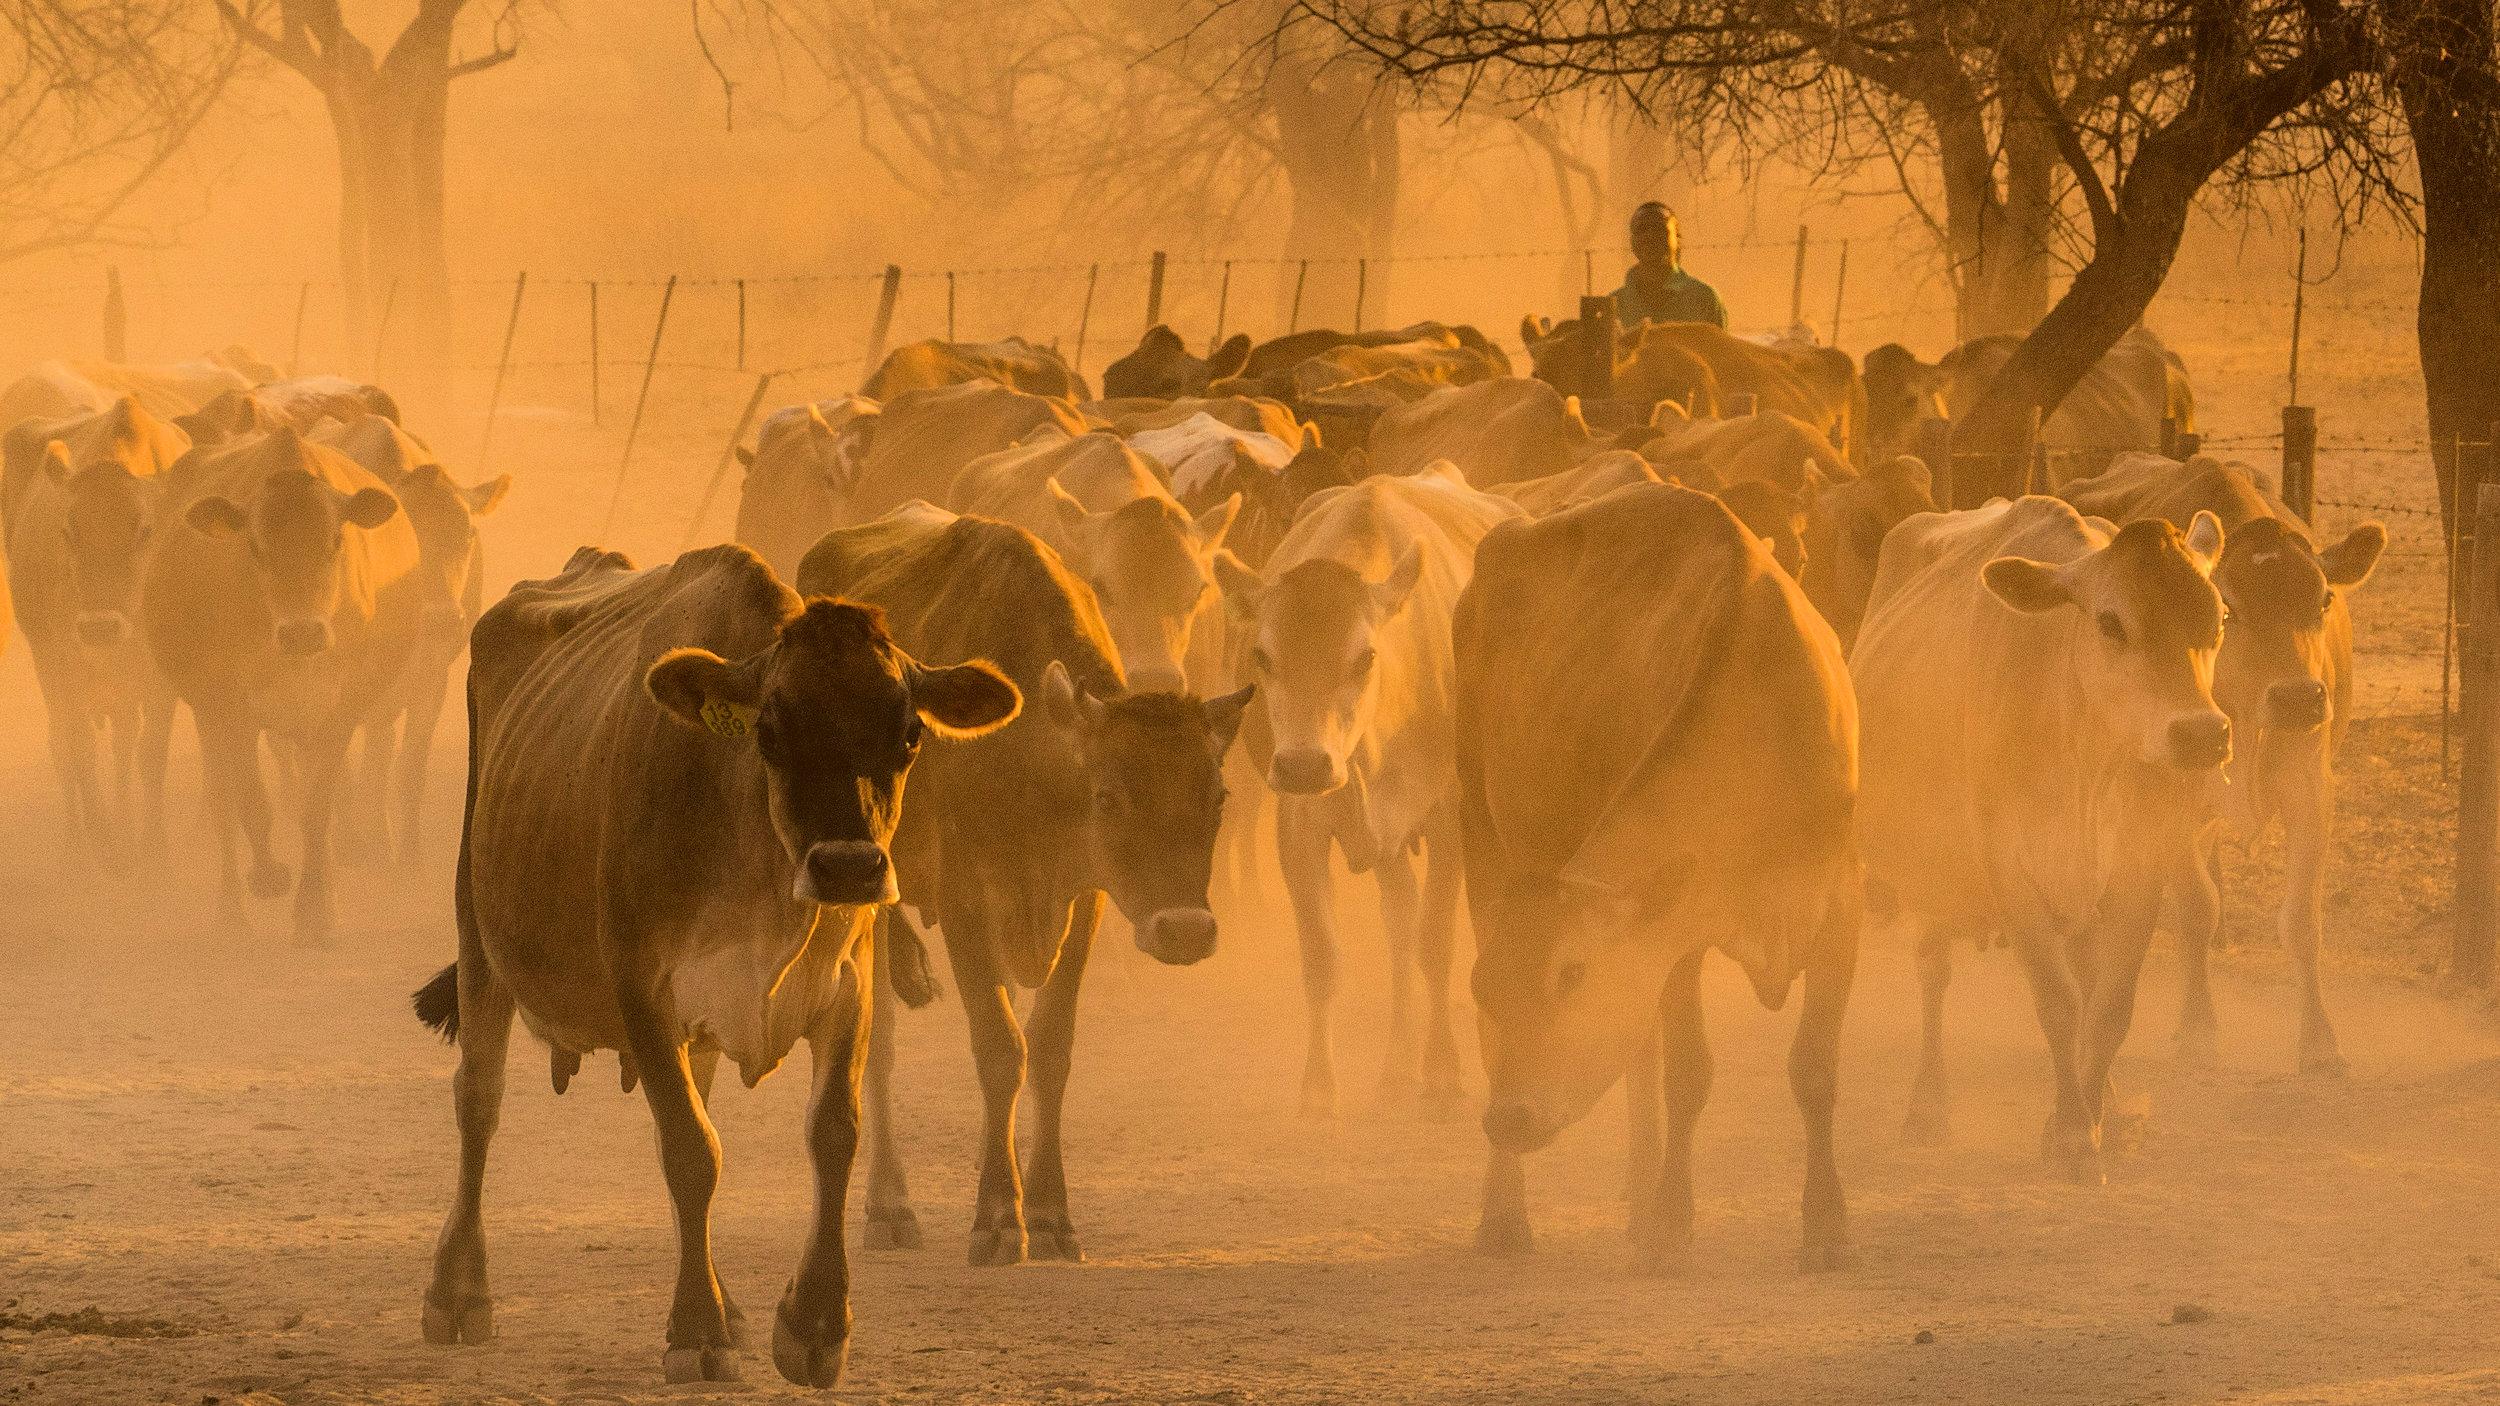 Jersey cows in Africa